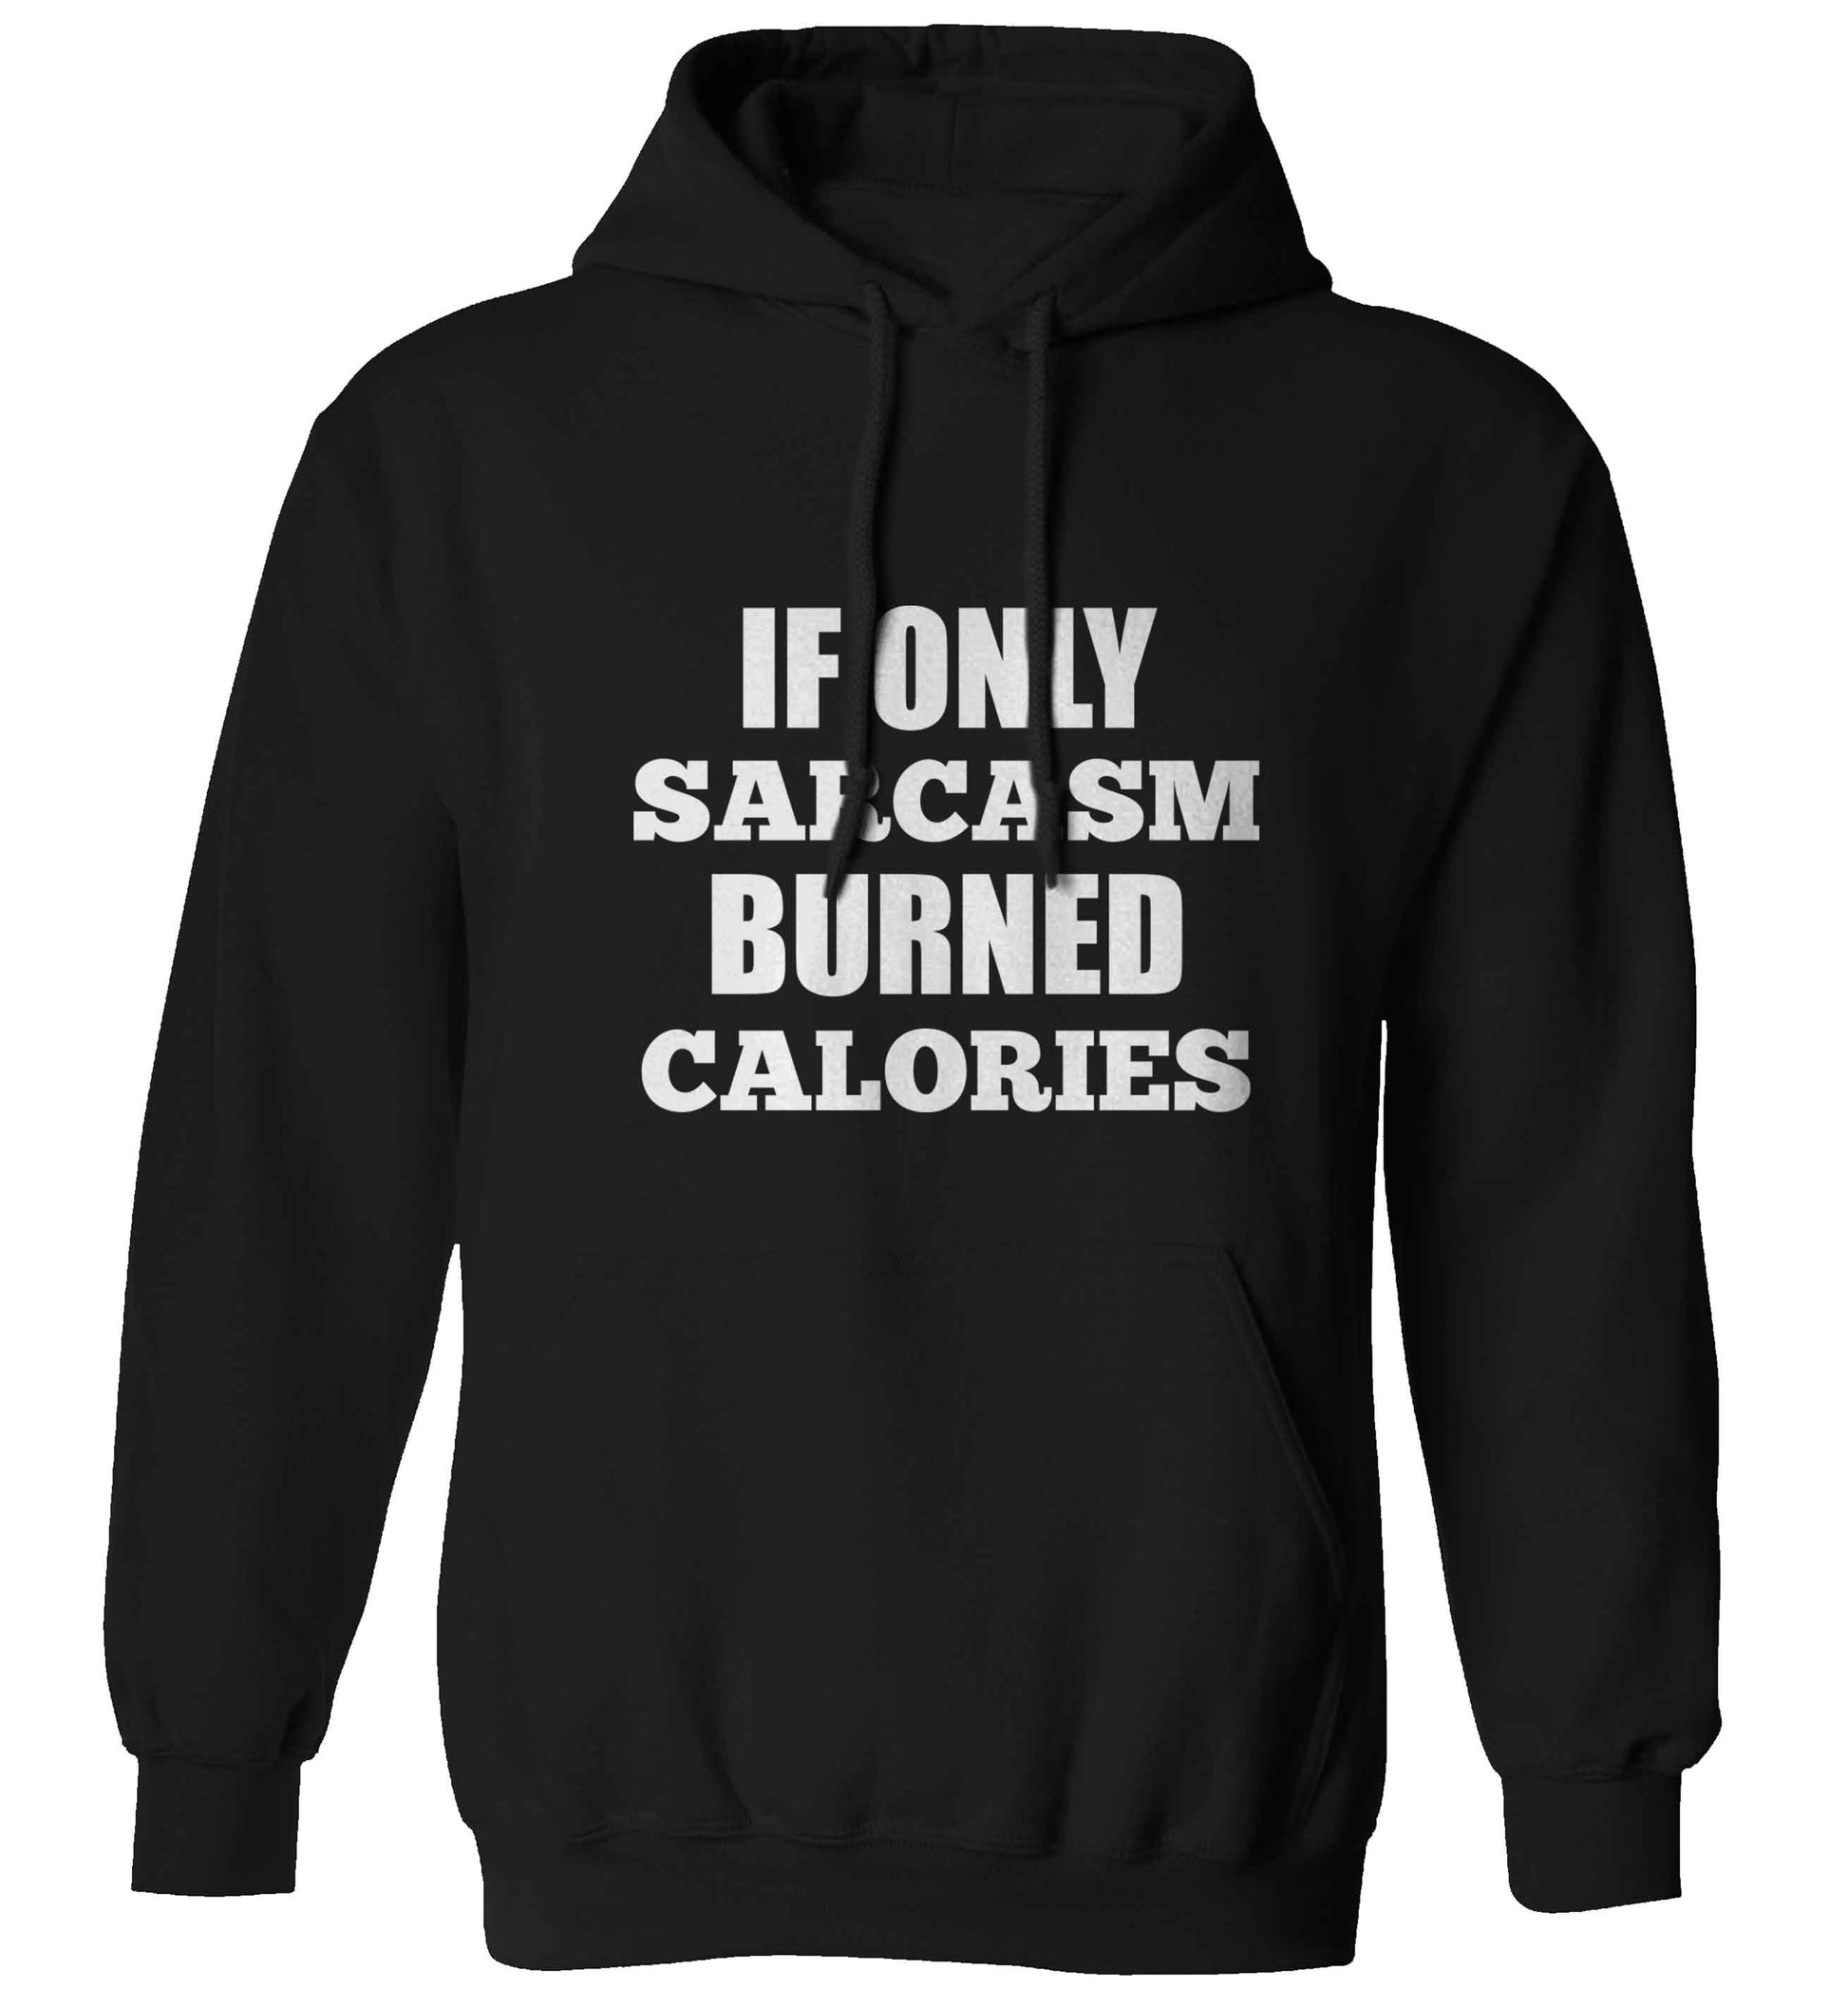 If only sarcasm burned calories adults unisex black hoodie 2XL